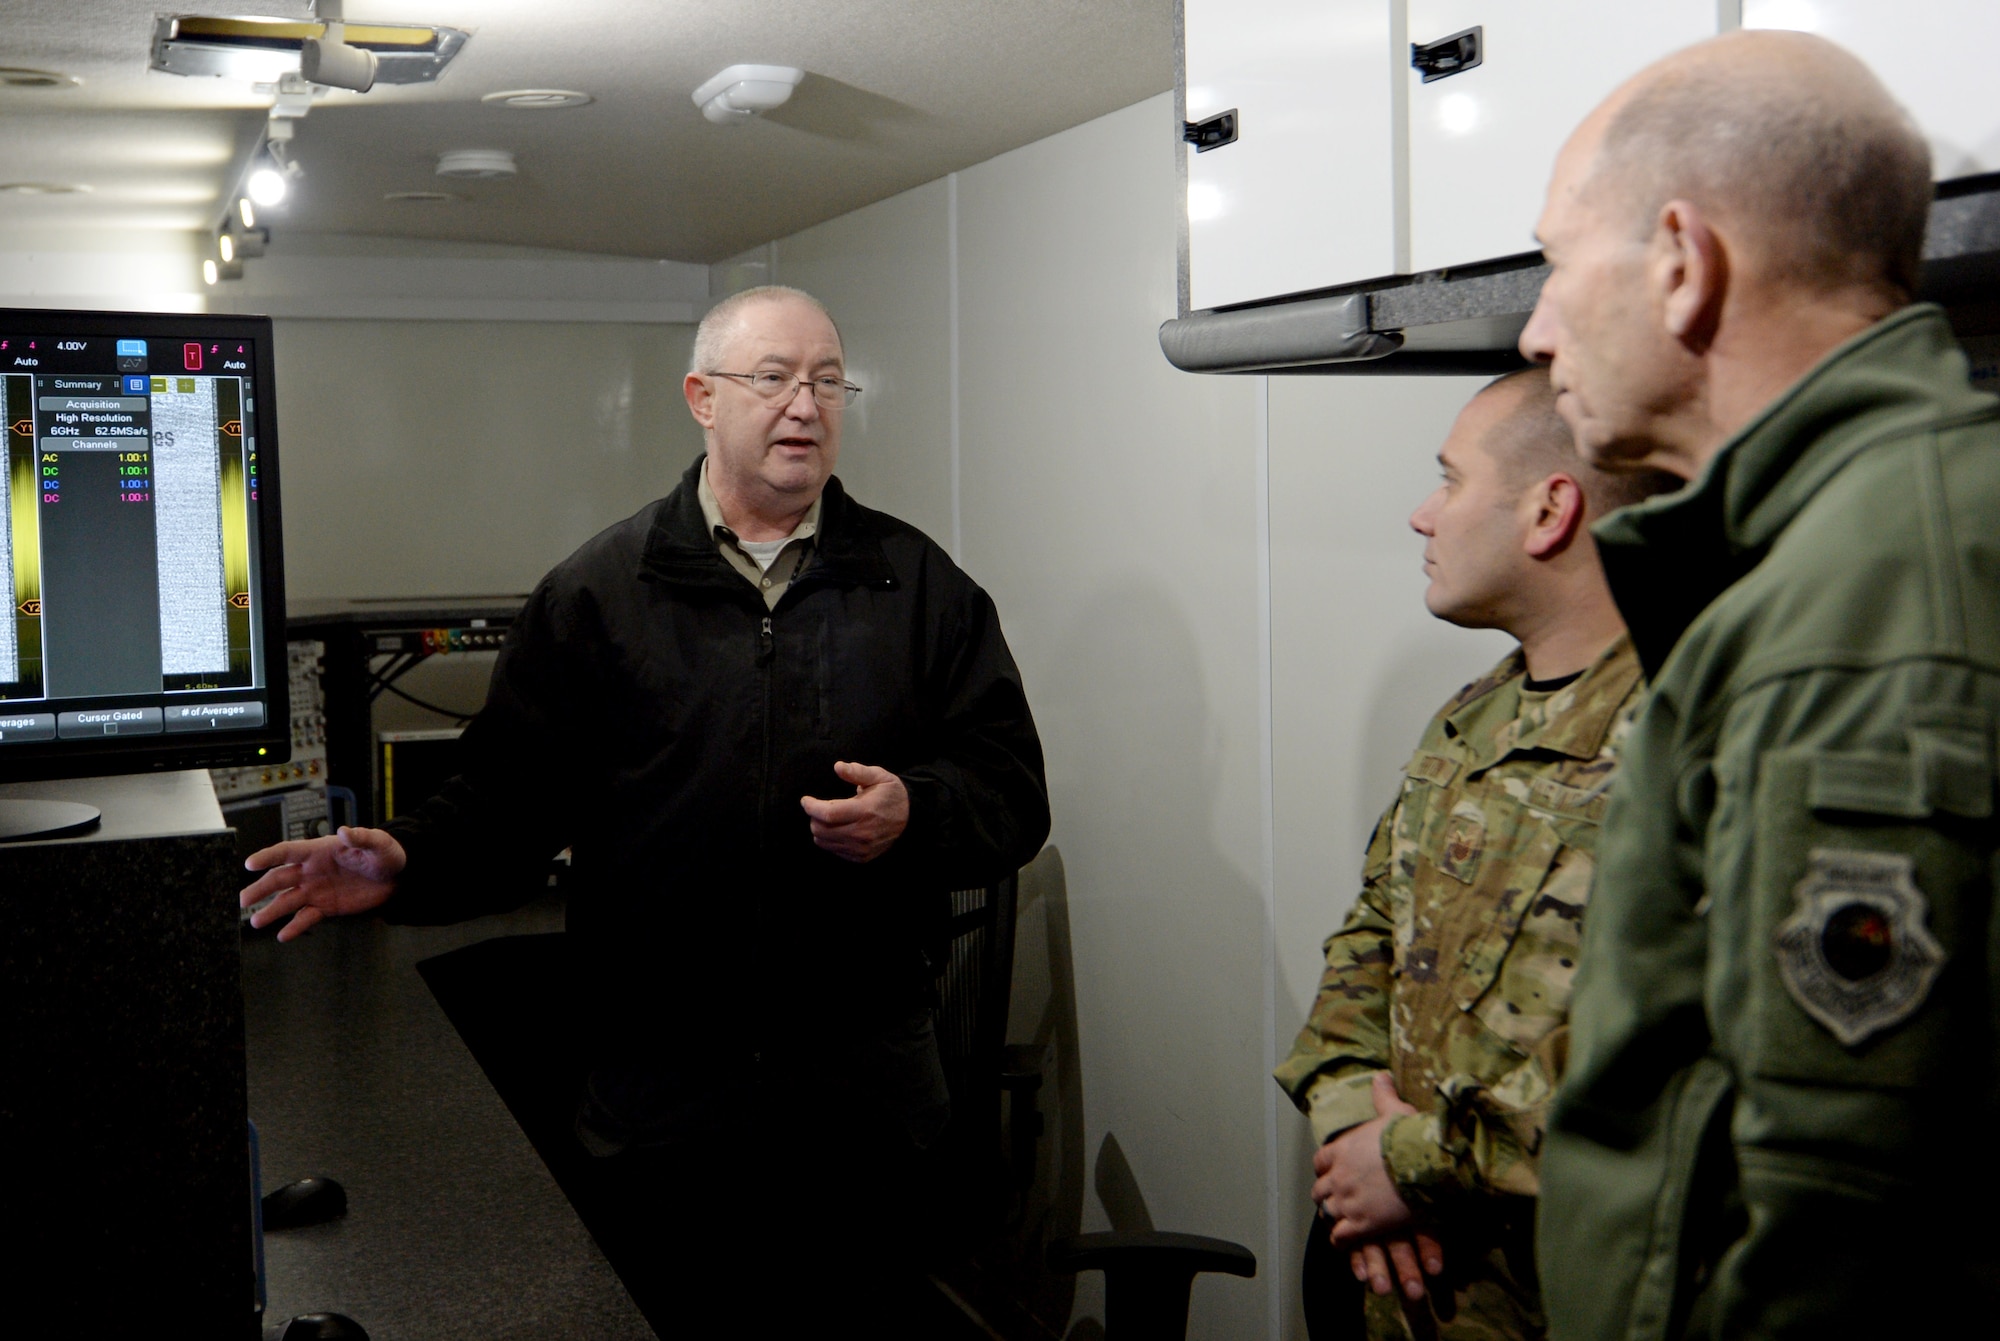 Patrick Moran, 346th Test Squadron TEMPEST technician, provides U.S. Air Force Gen. Mike Holmes, commander of Air Combat Command, a tour of the squadron’s emissions security van during Holmes’ visit to Joint Base San Antonio-Lackland, Texas, March 4, 2019. The squadron conducts operational tests, evaluations and special assessments of cyberspace capabilities, and provides cyberspace test and training ranges to enhance the military utility of cyberspace. (U.S. Air Force Photo by Tech. Sgt. R.J. Biermann)